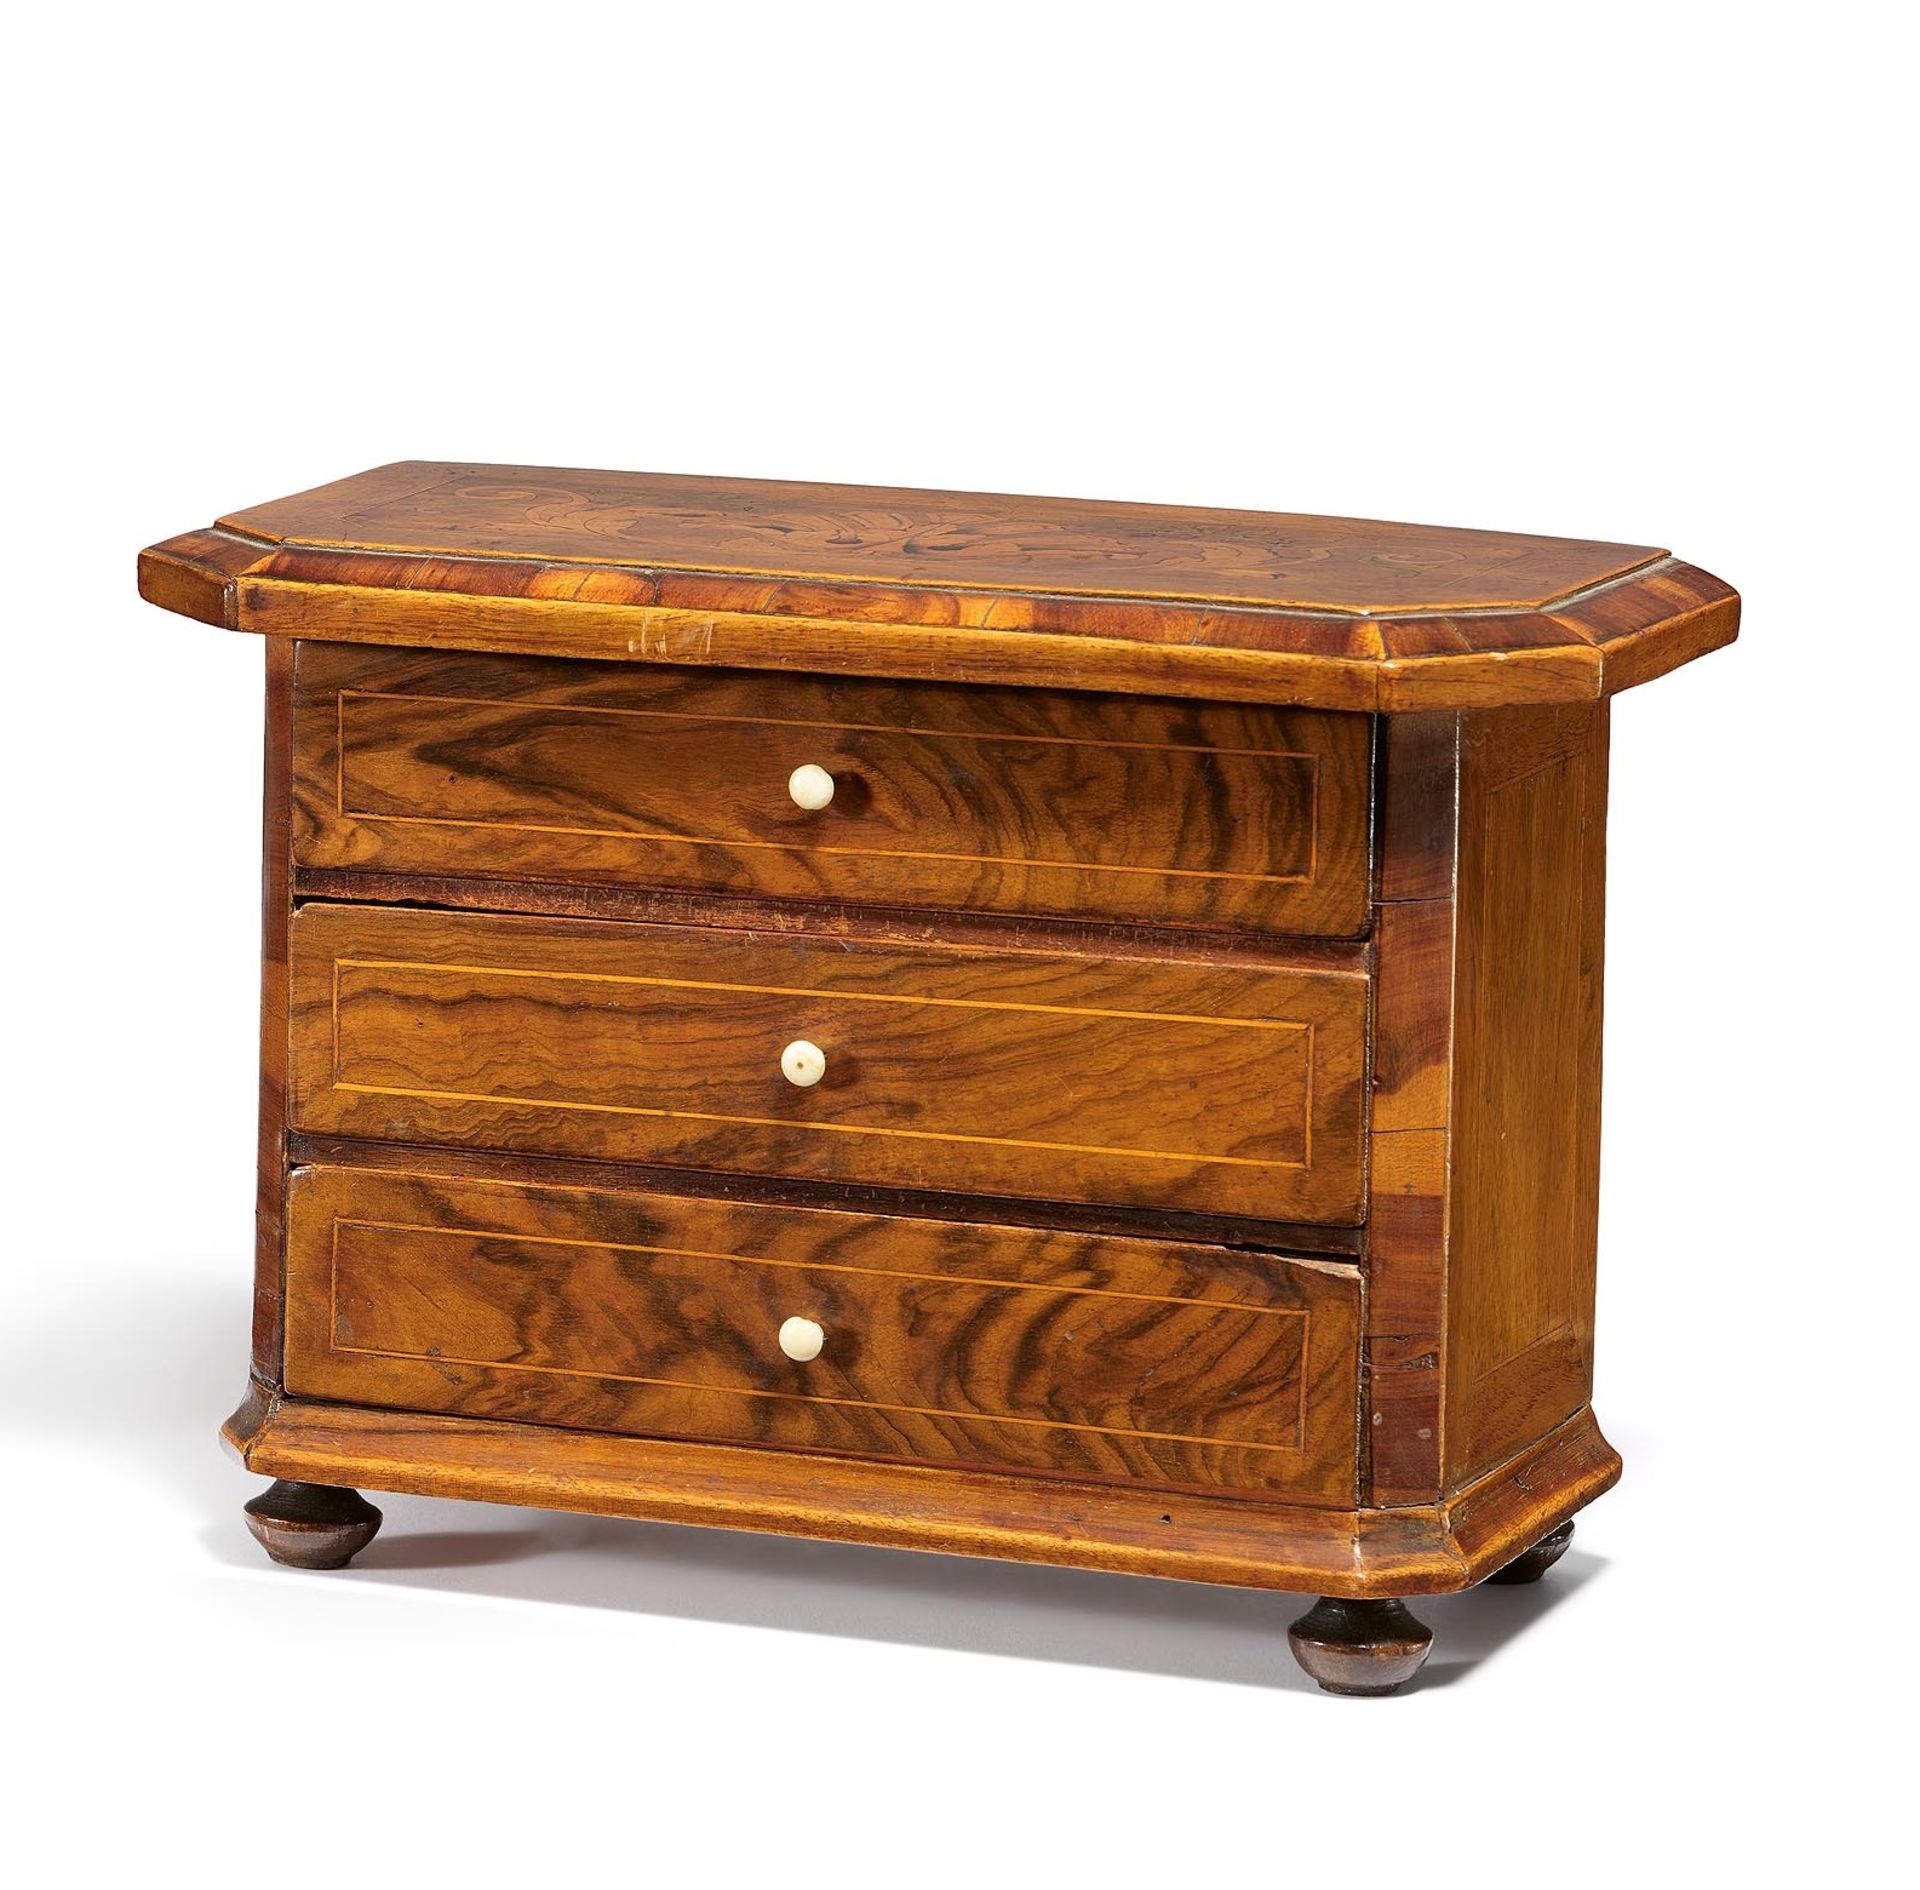 Germany: SMALL MODEL CHEST OF DRAWERS WITH FLORAL INLAYS MADE OF WOOD AND BONE